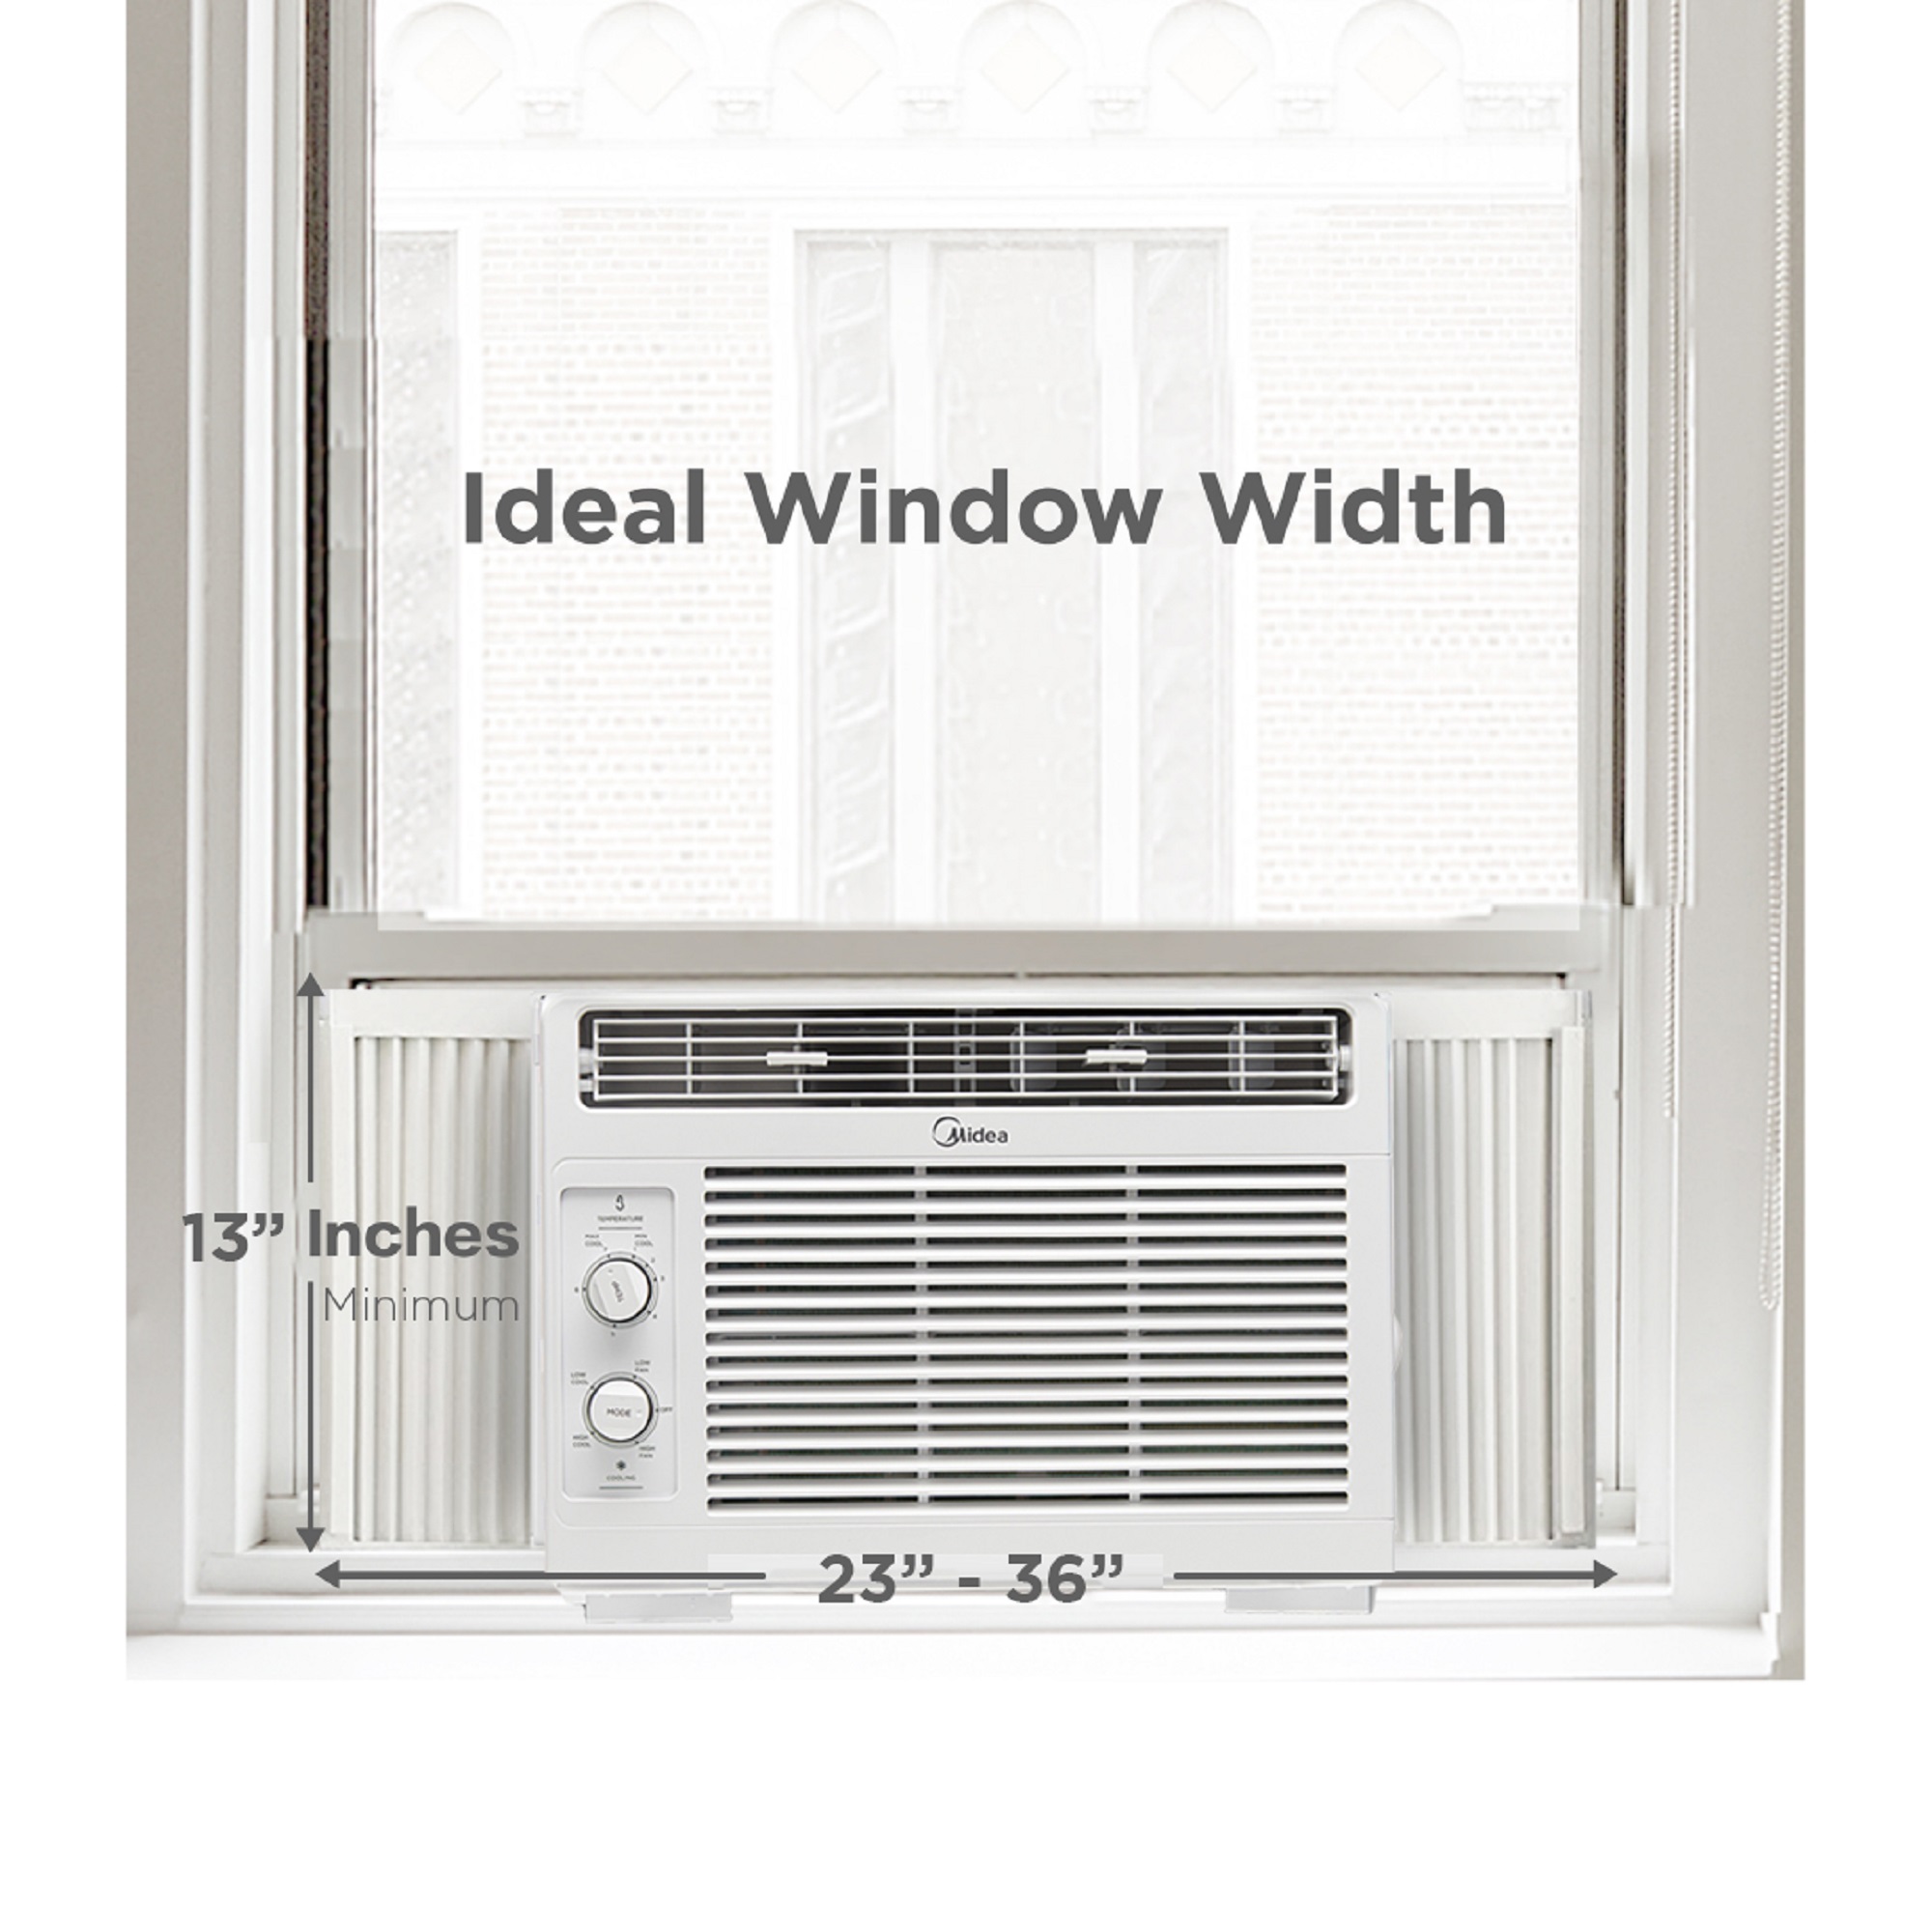 Midea 5,000 BTU 150 Sq ft Mechanical Window Air Conditioner, White, MAW05M1WWT - image 4 of 17